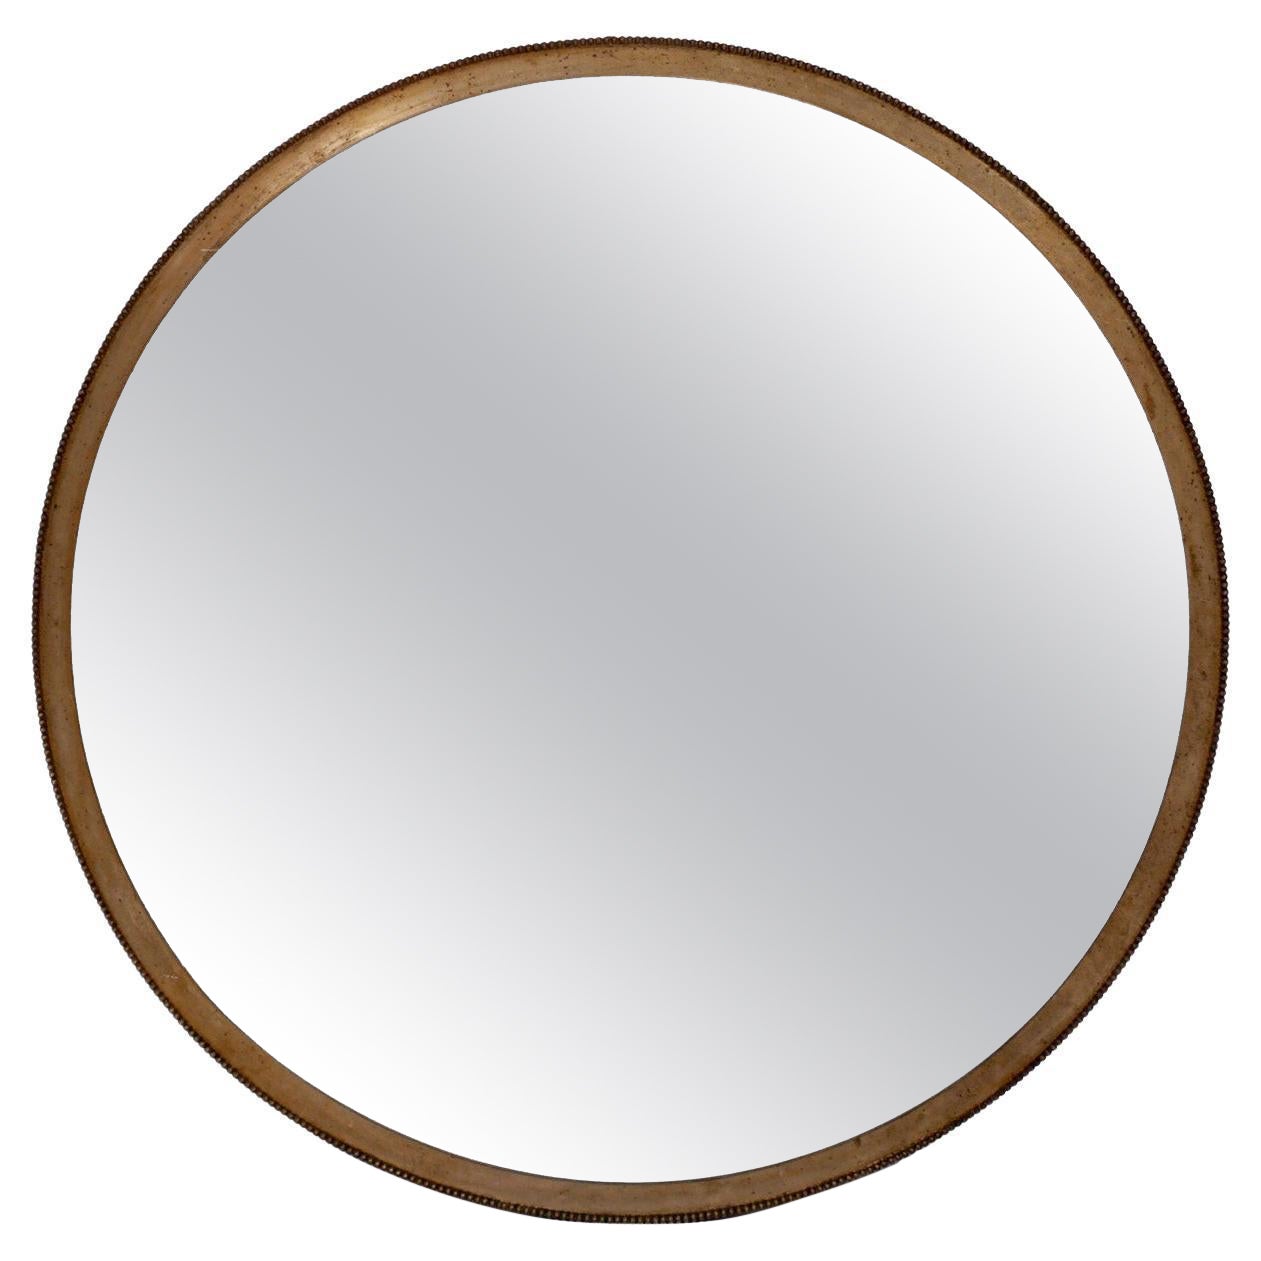 Brasscrafters Industrial Porthole Mirror